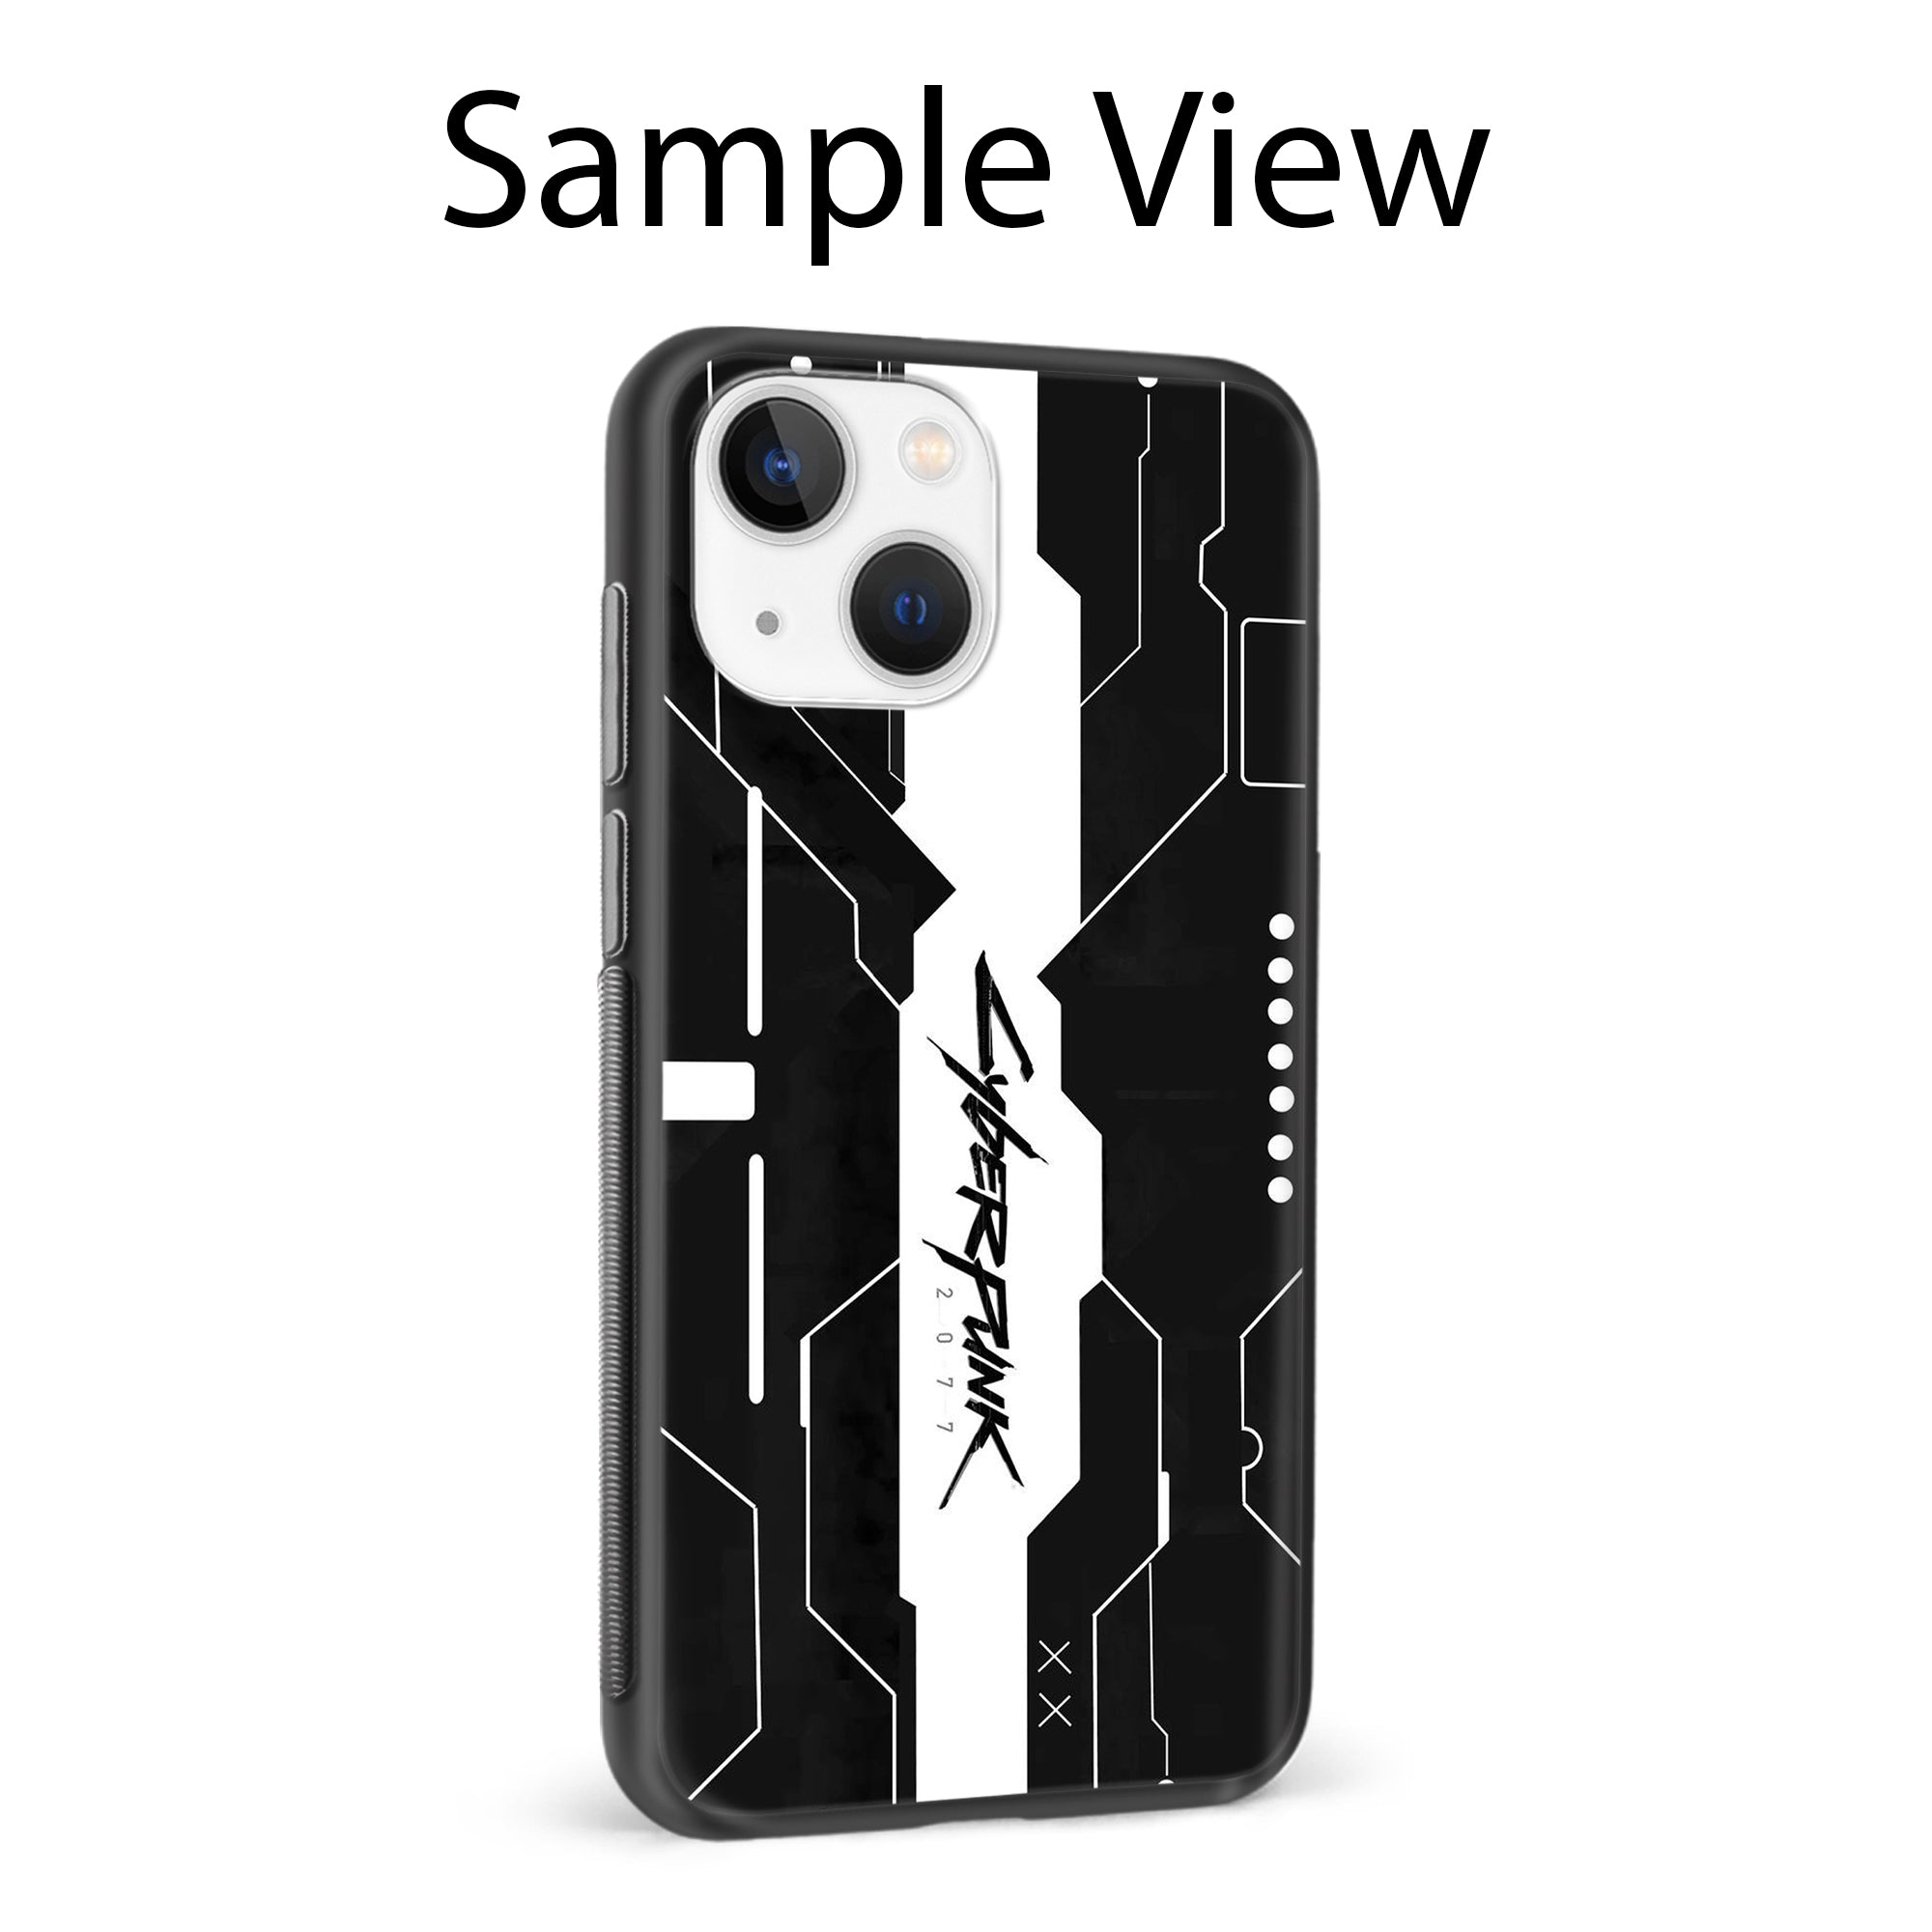 Buy Cyberpunk 2077 Art Metal-Silicon Back Mobile Phone Case/Cover For Samsung Note 10 Plus (5G) Online